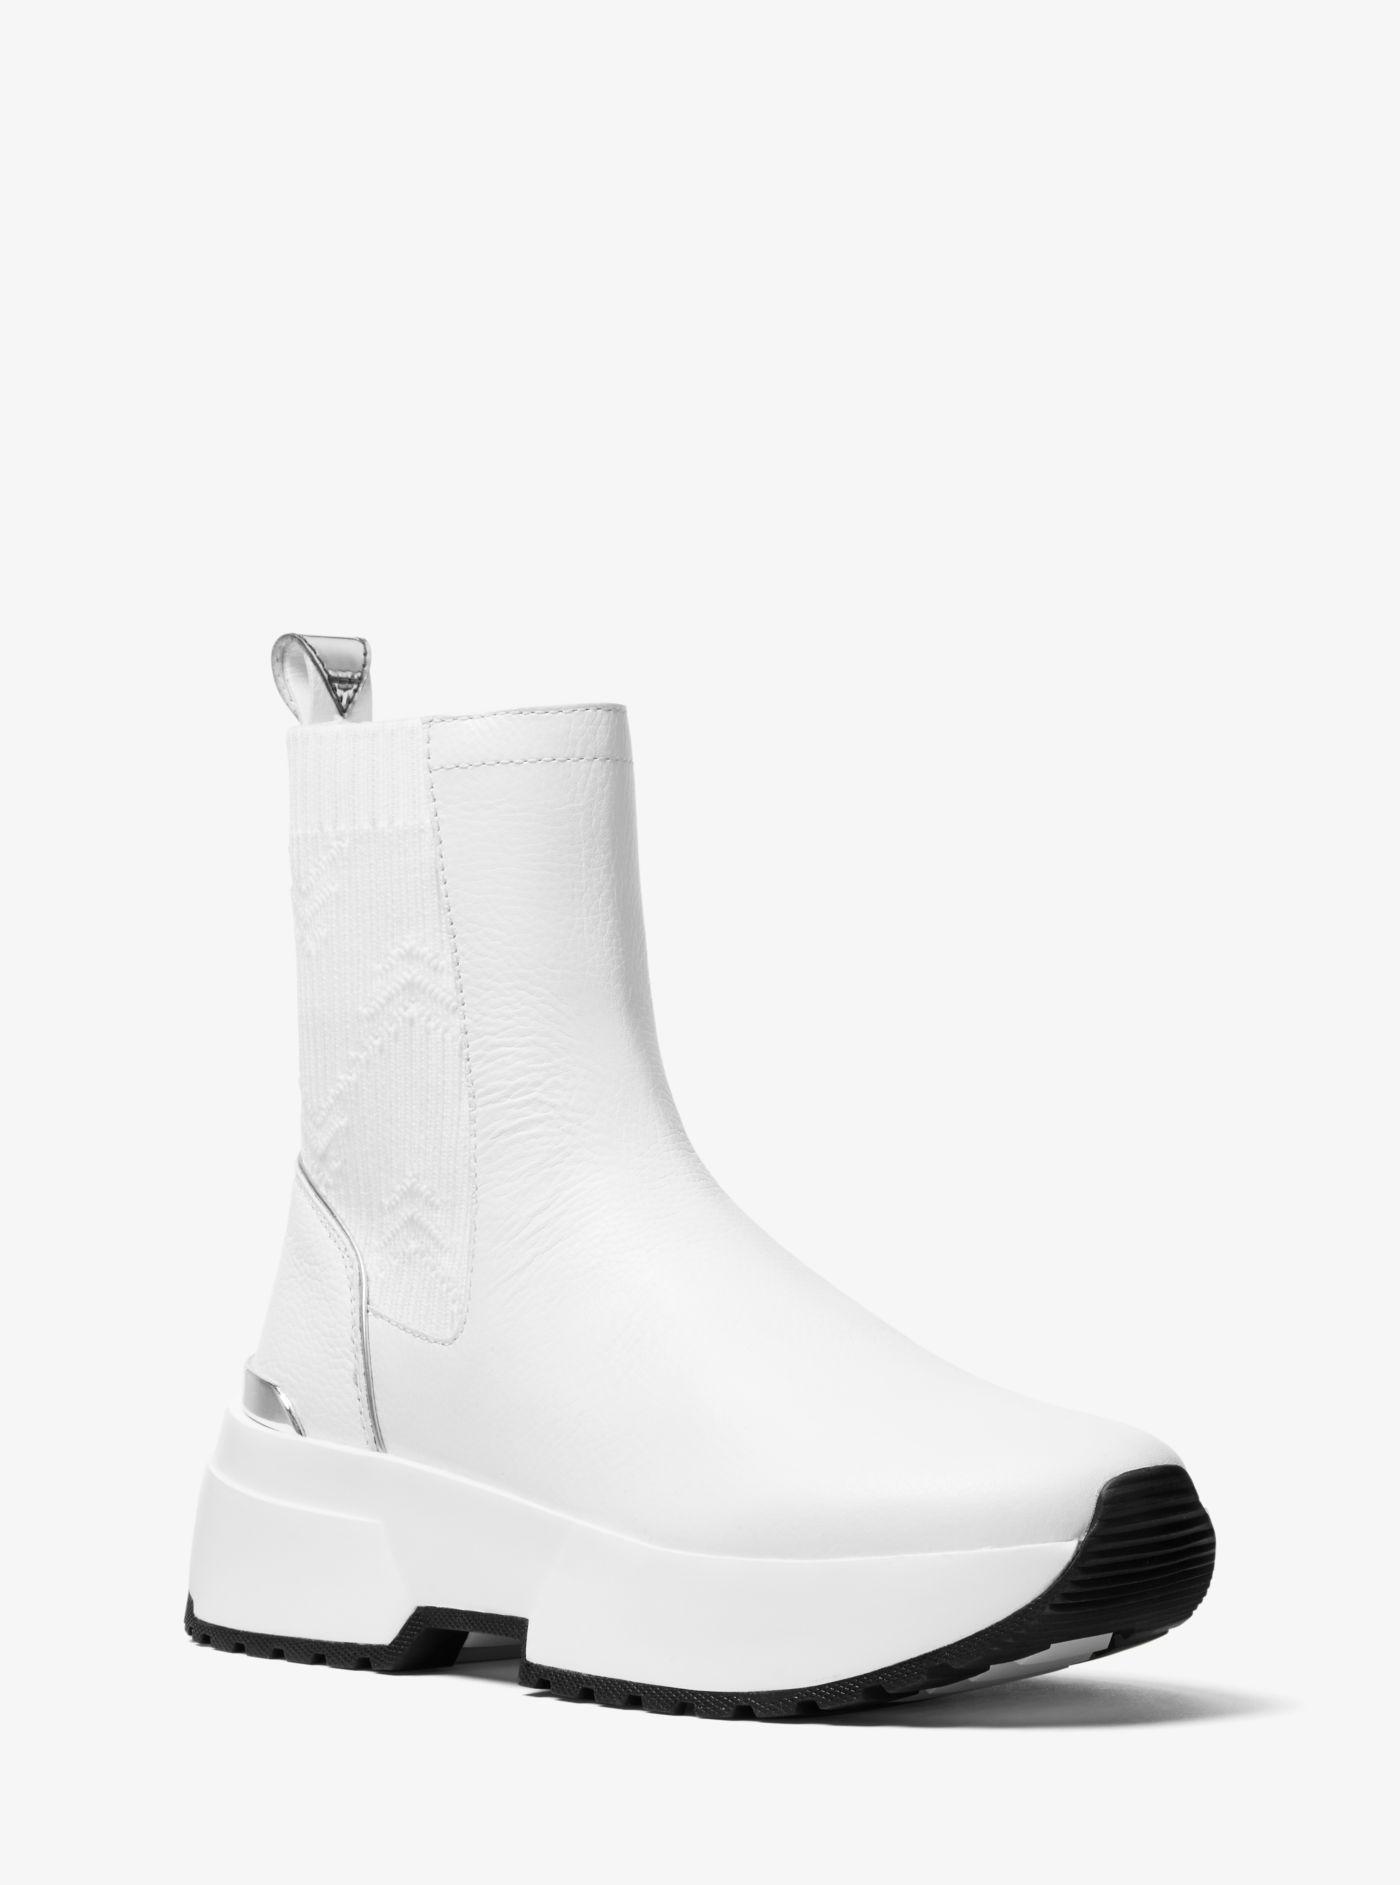 Michael Kors Cosmo Leather Sneaker Boot 